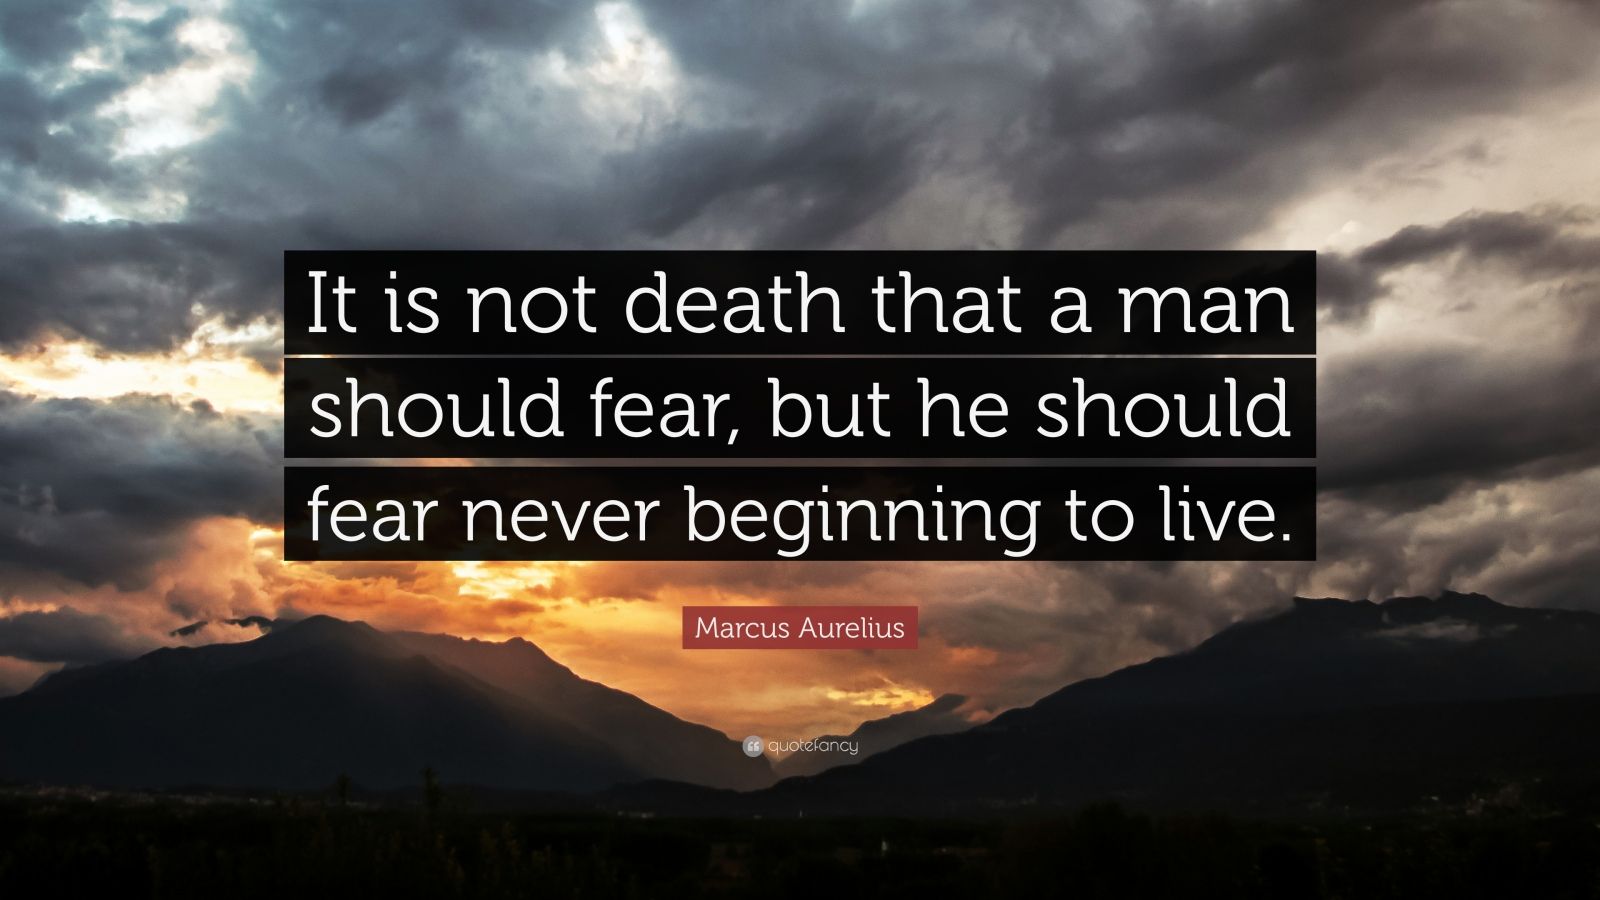 Marcus Aurelius Quote: “It is not death that a man should fear, but he ...